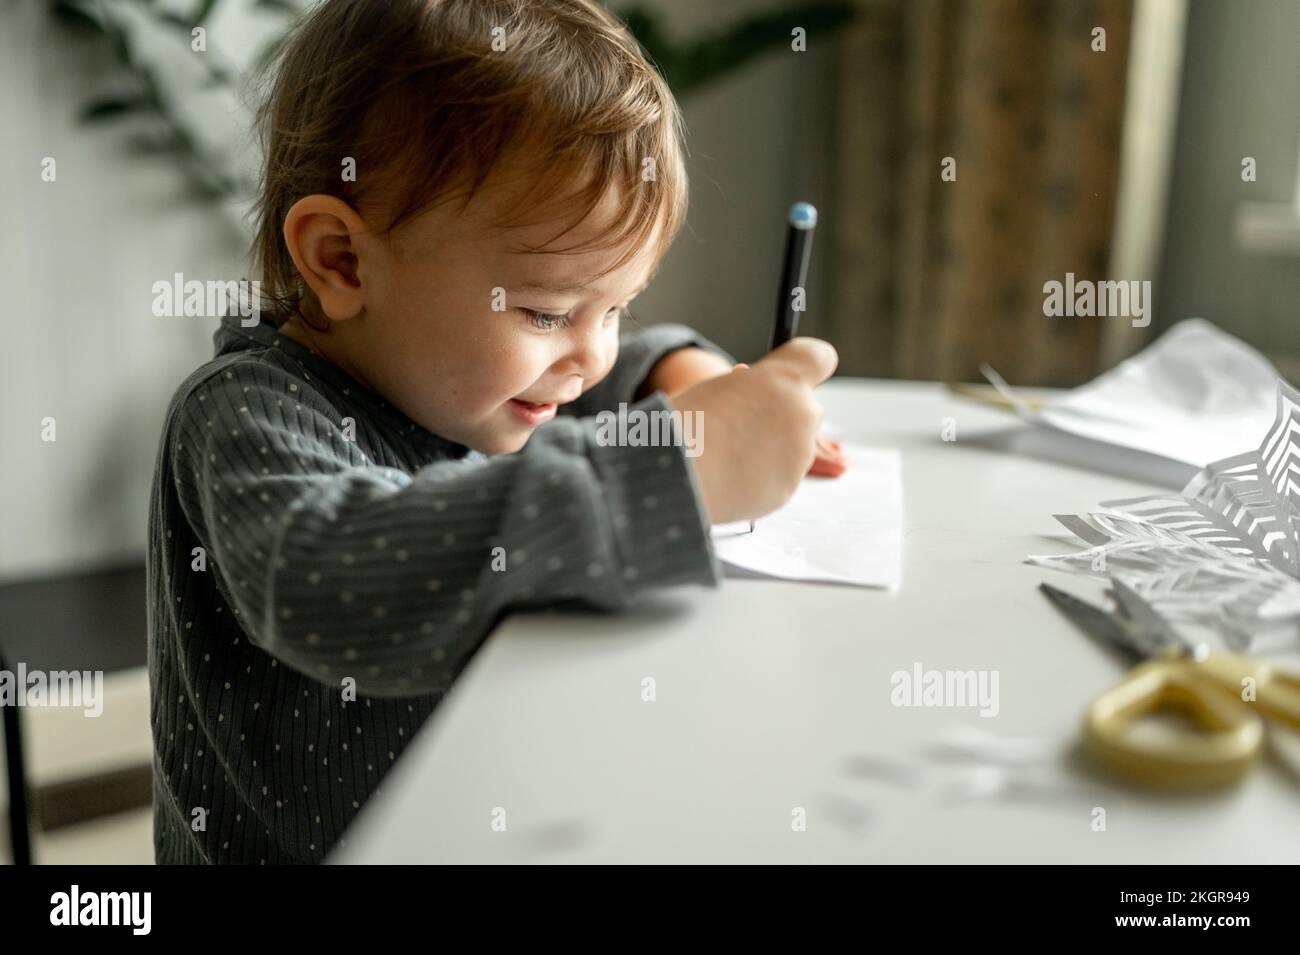 Boy drawing on paper with pencil at table in home Stock Photo